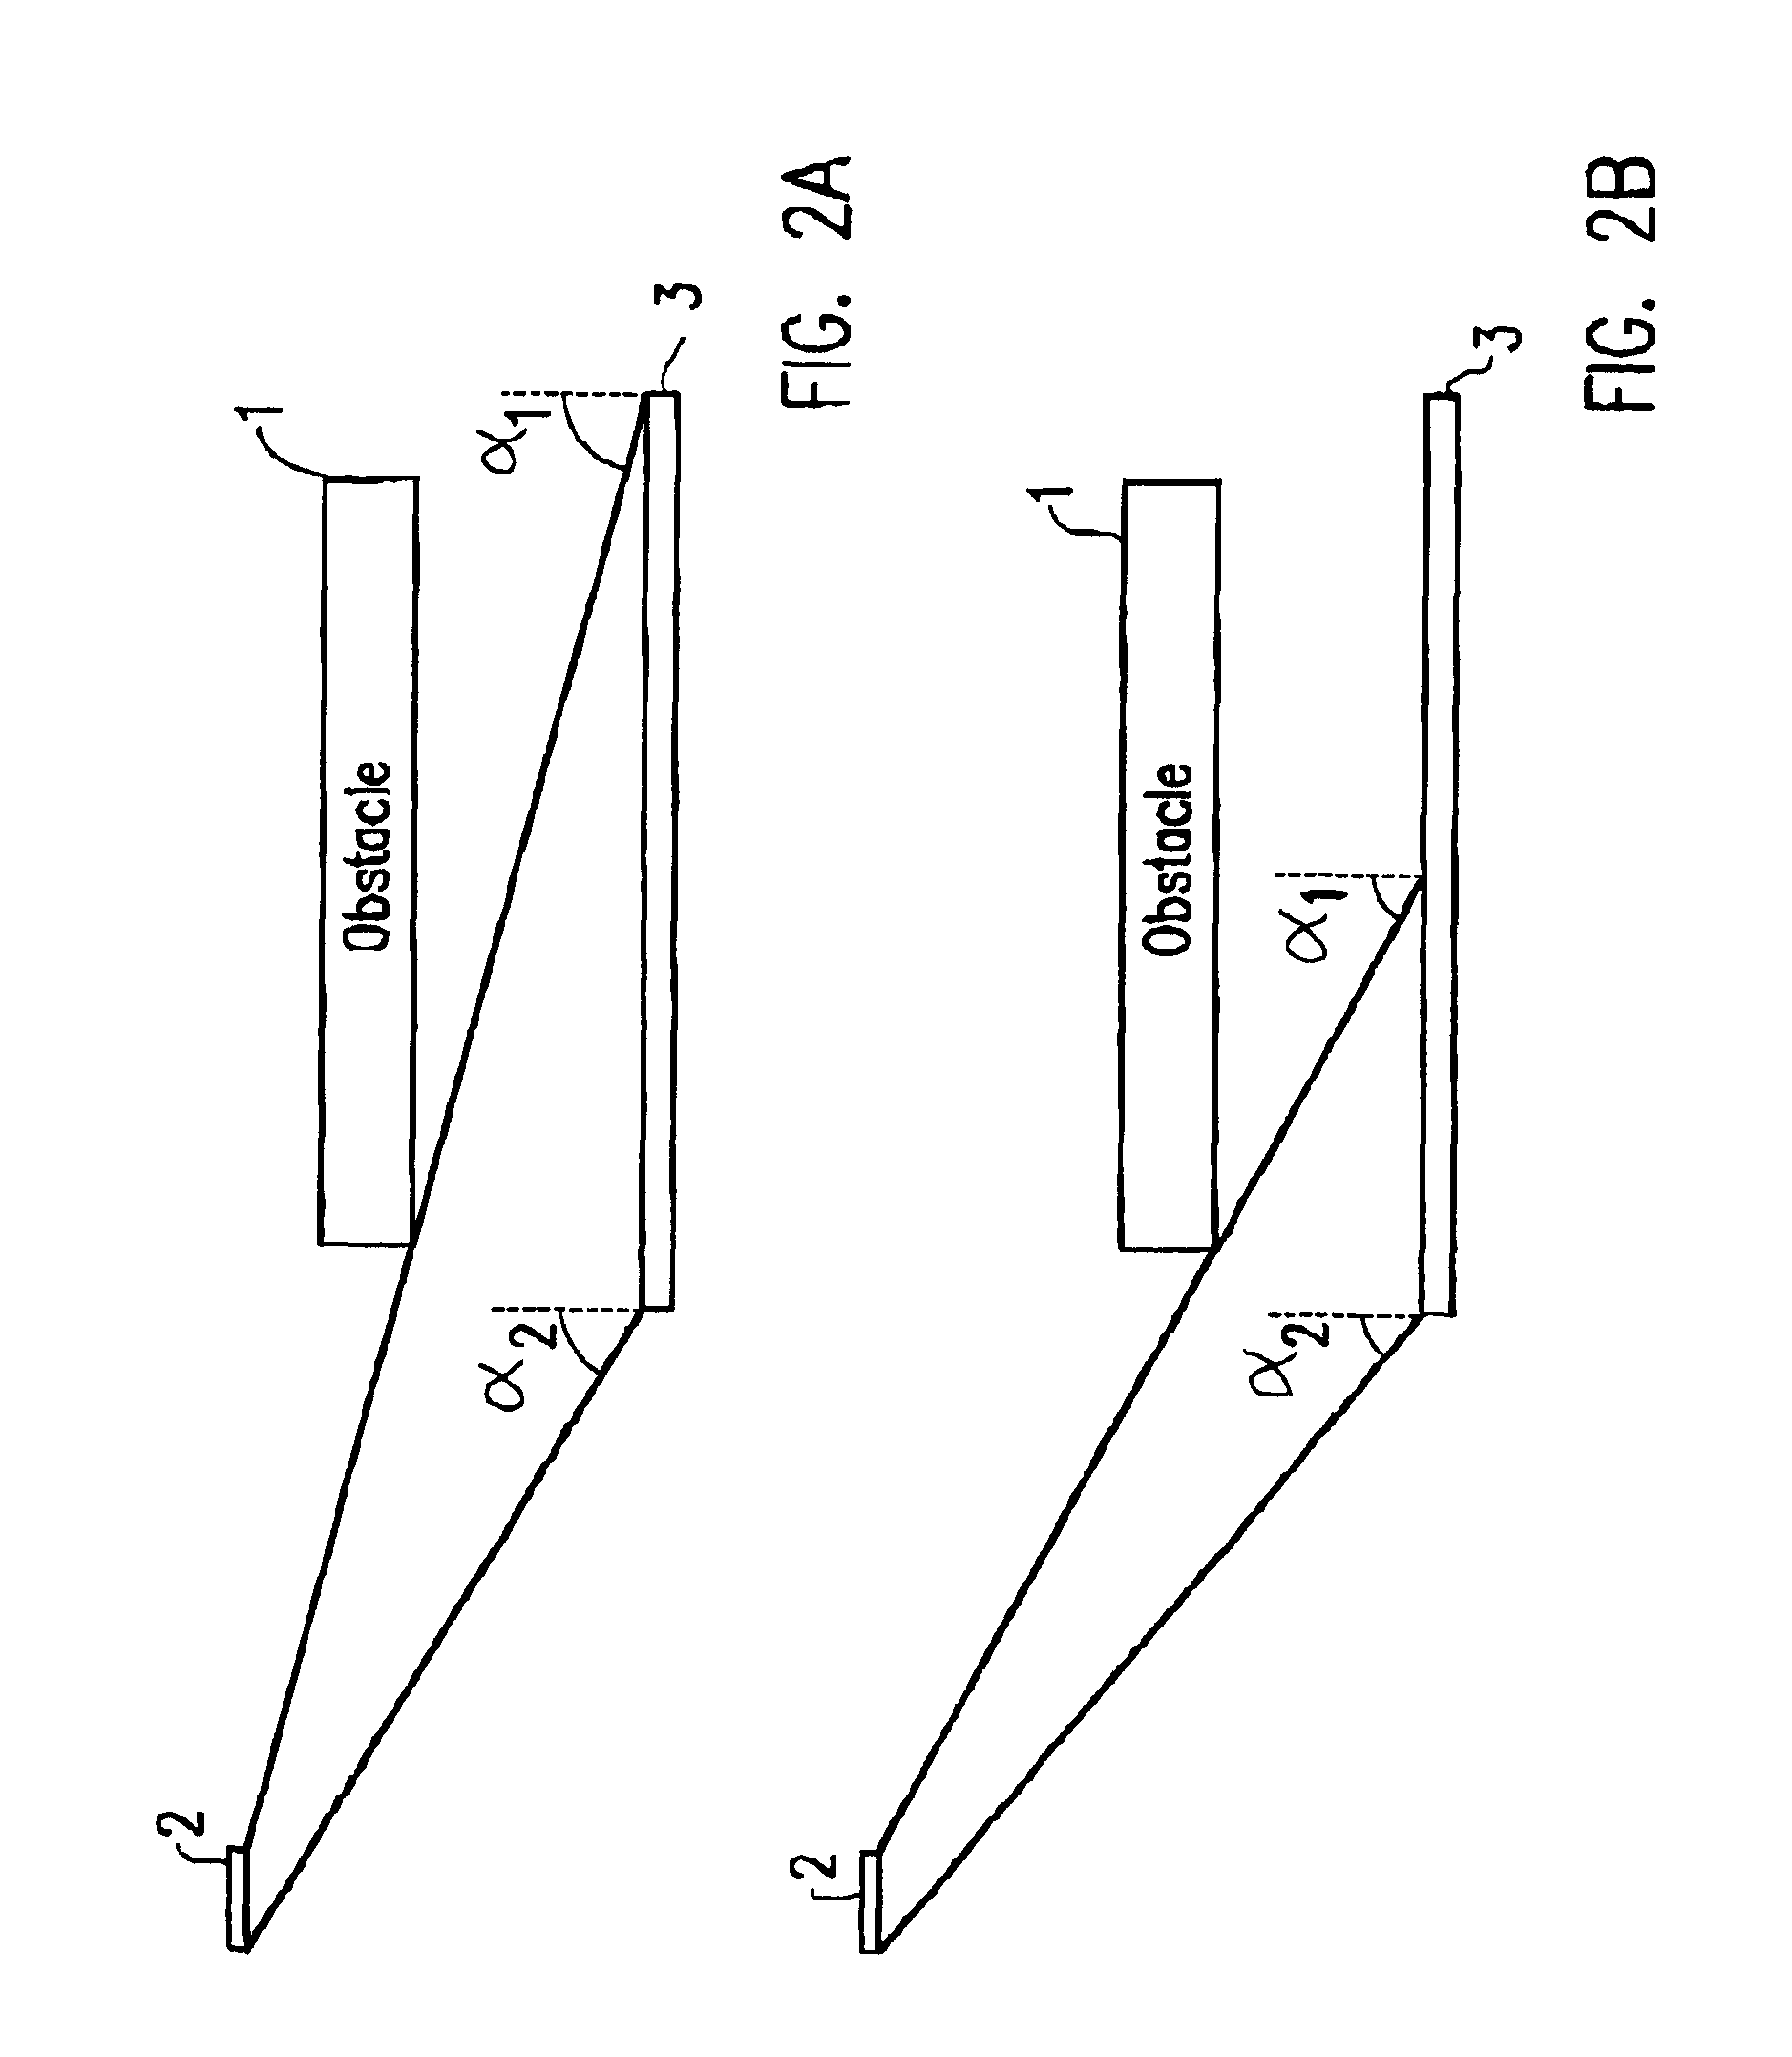 Lithography system